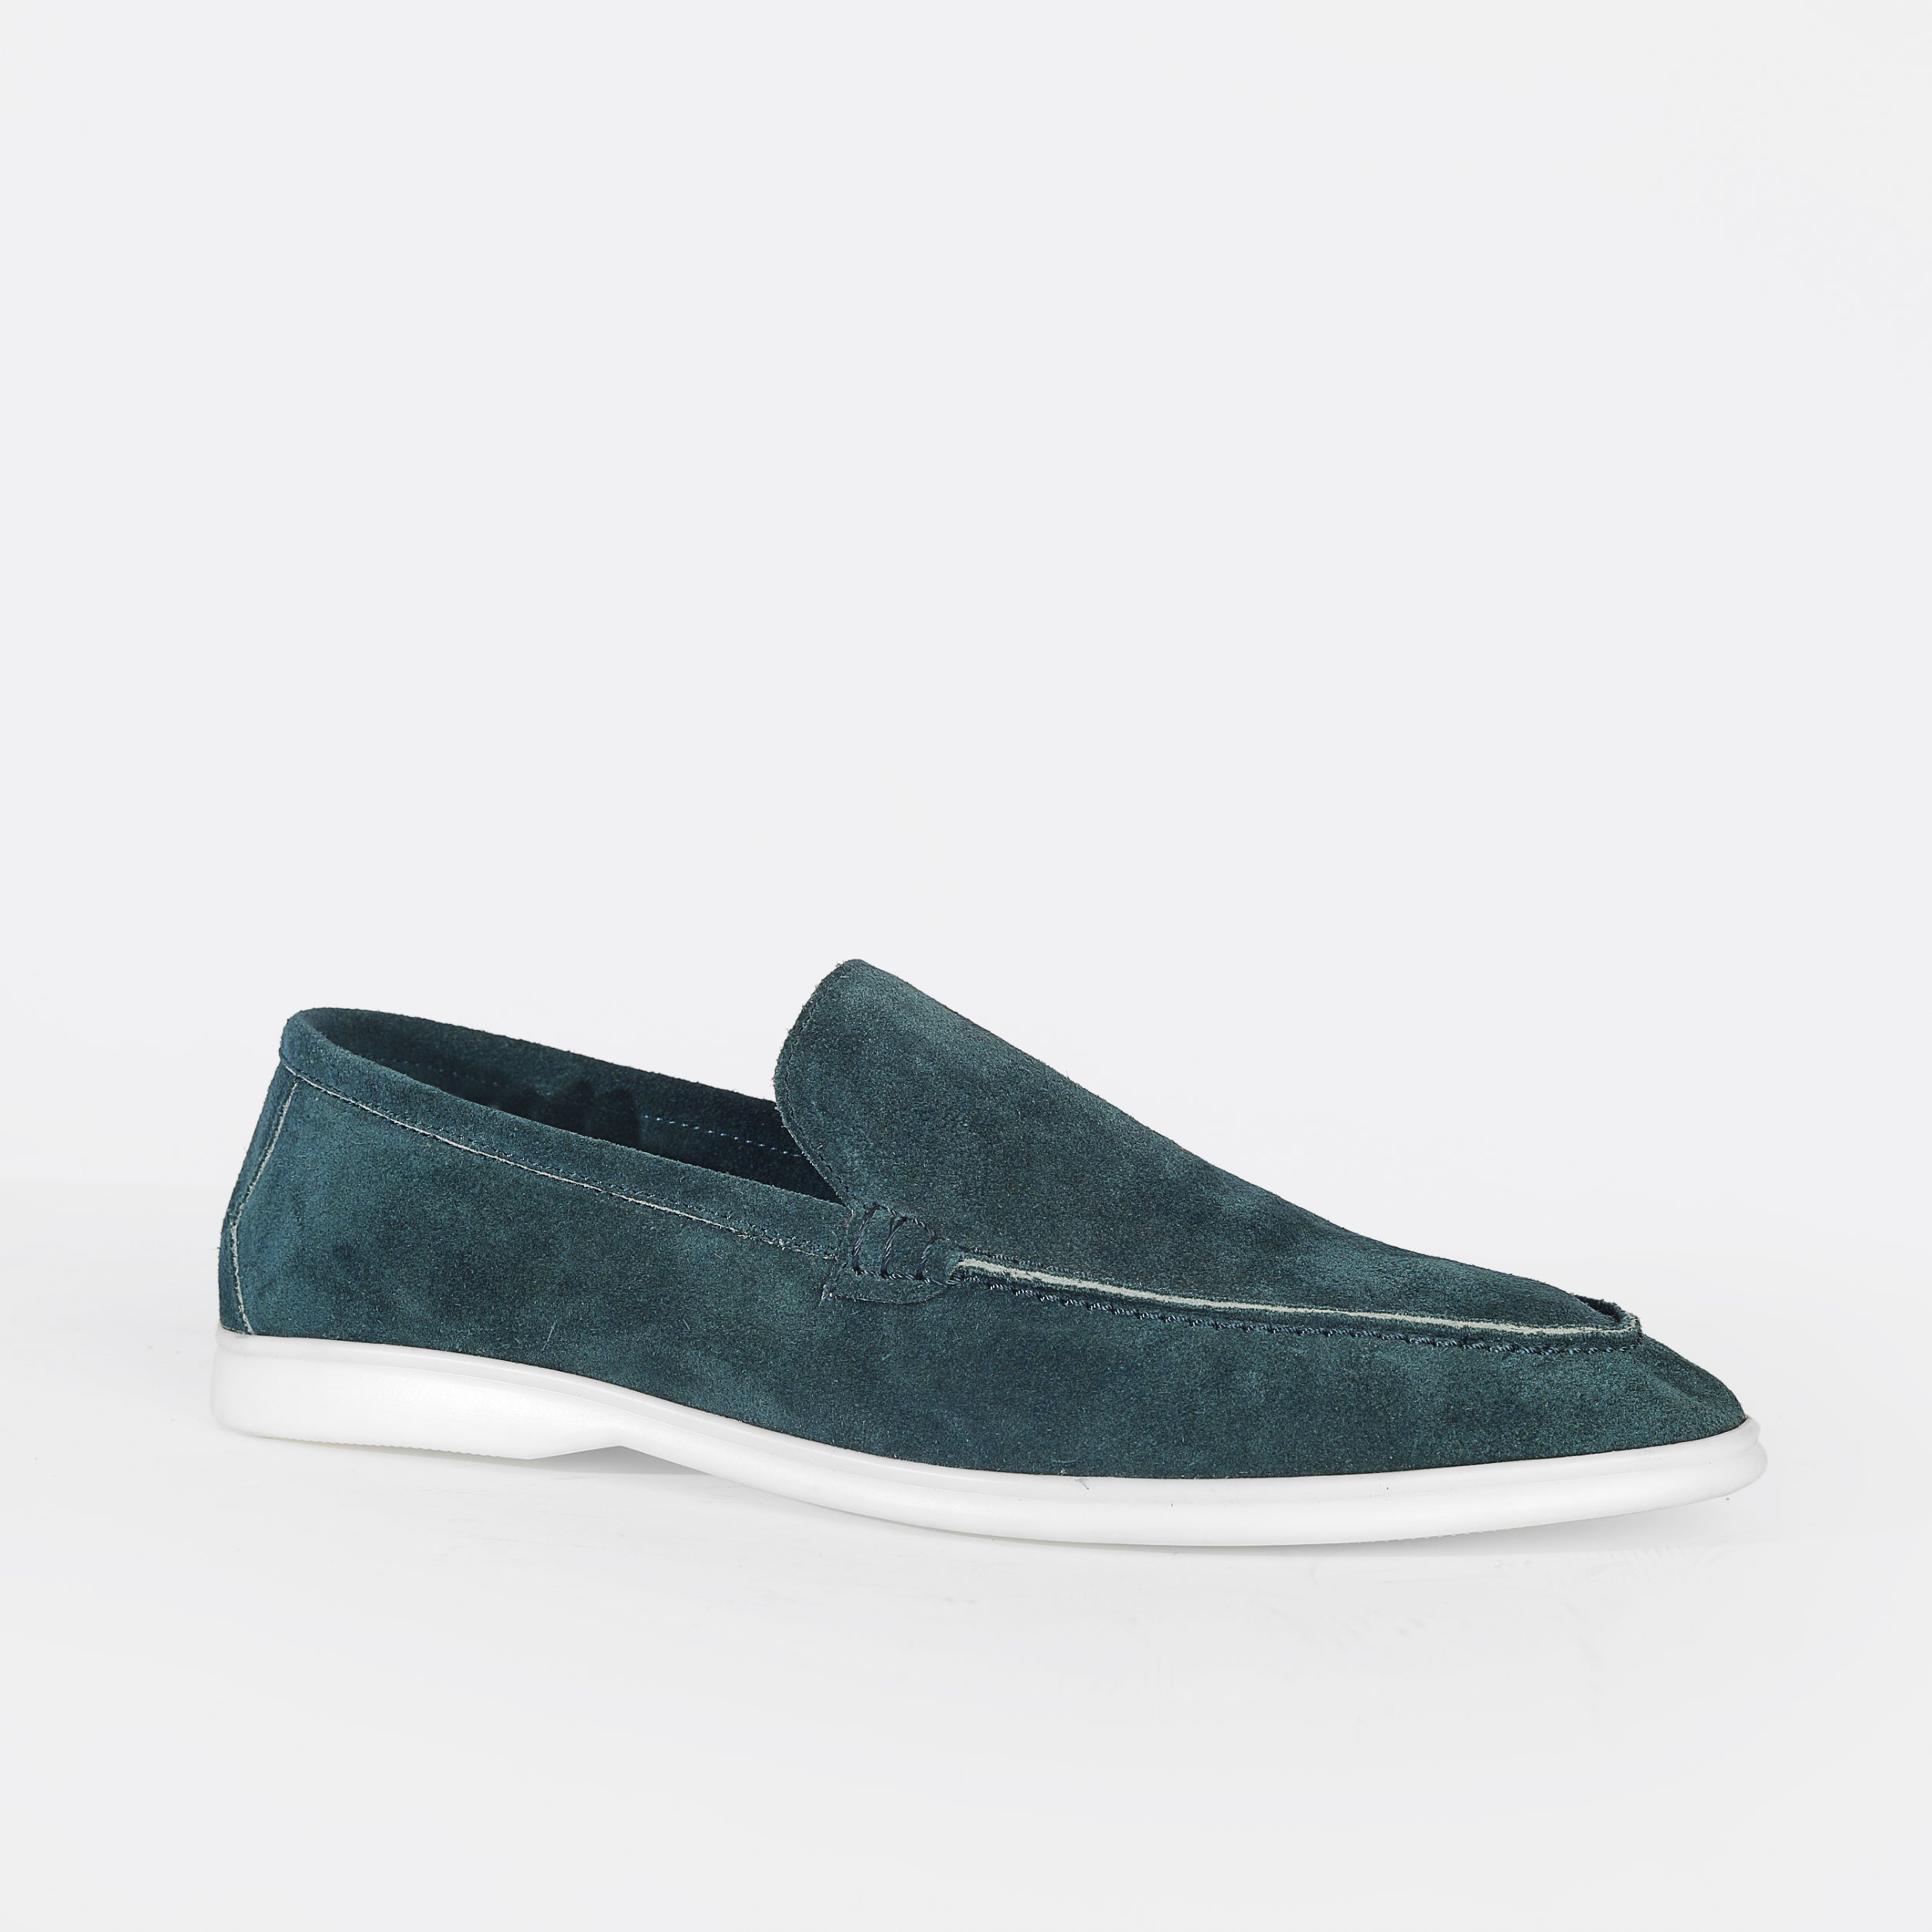 Heritage Suede Flat Loafers For Men Light Navy